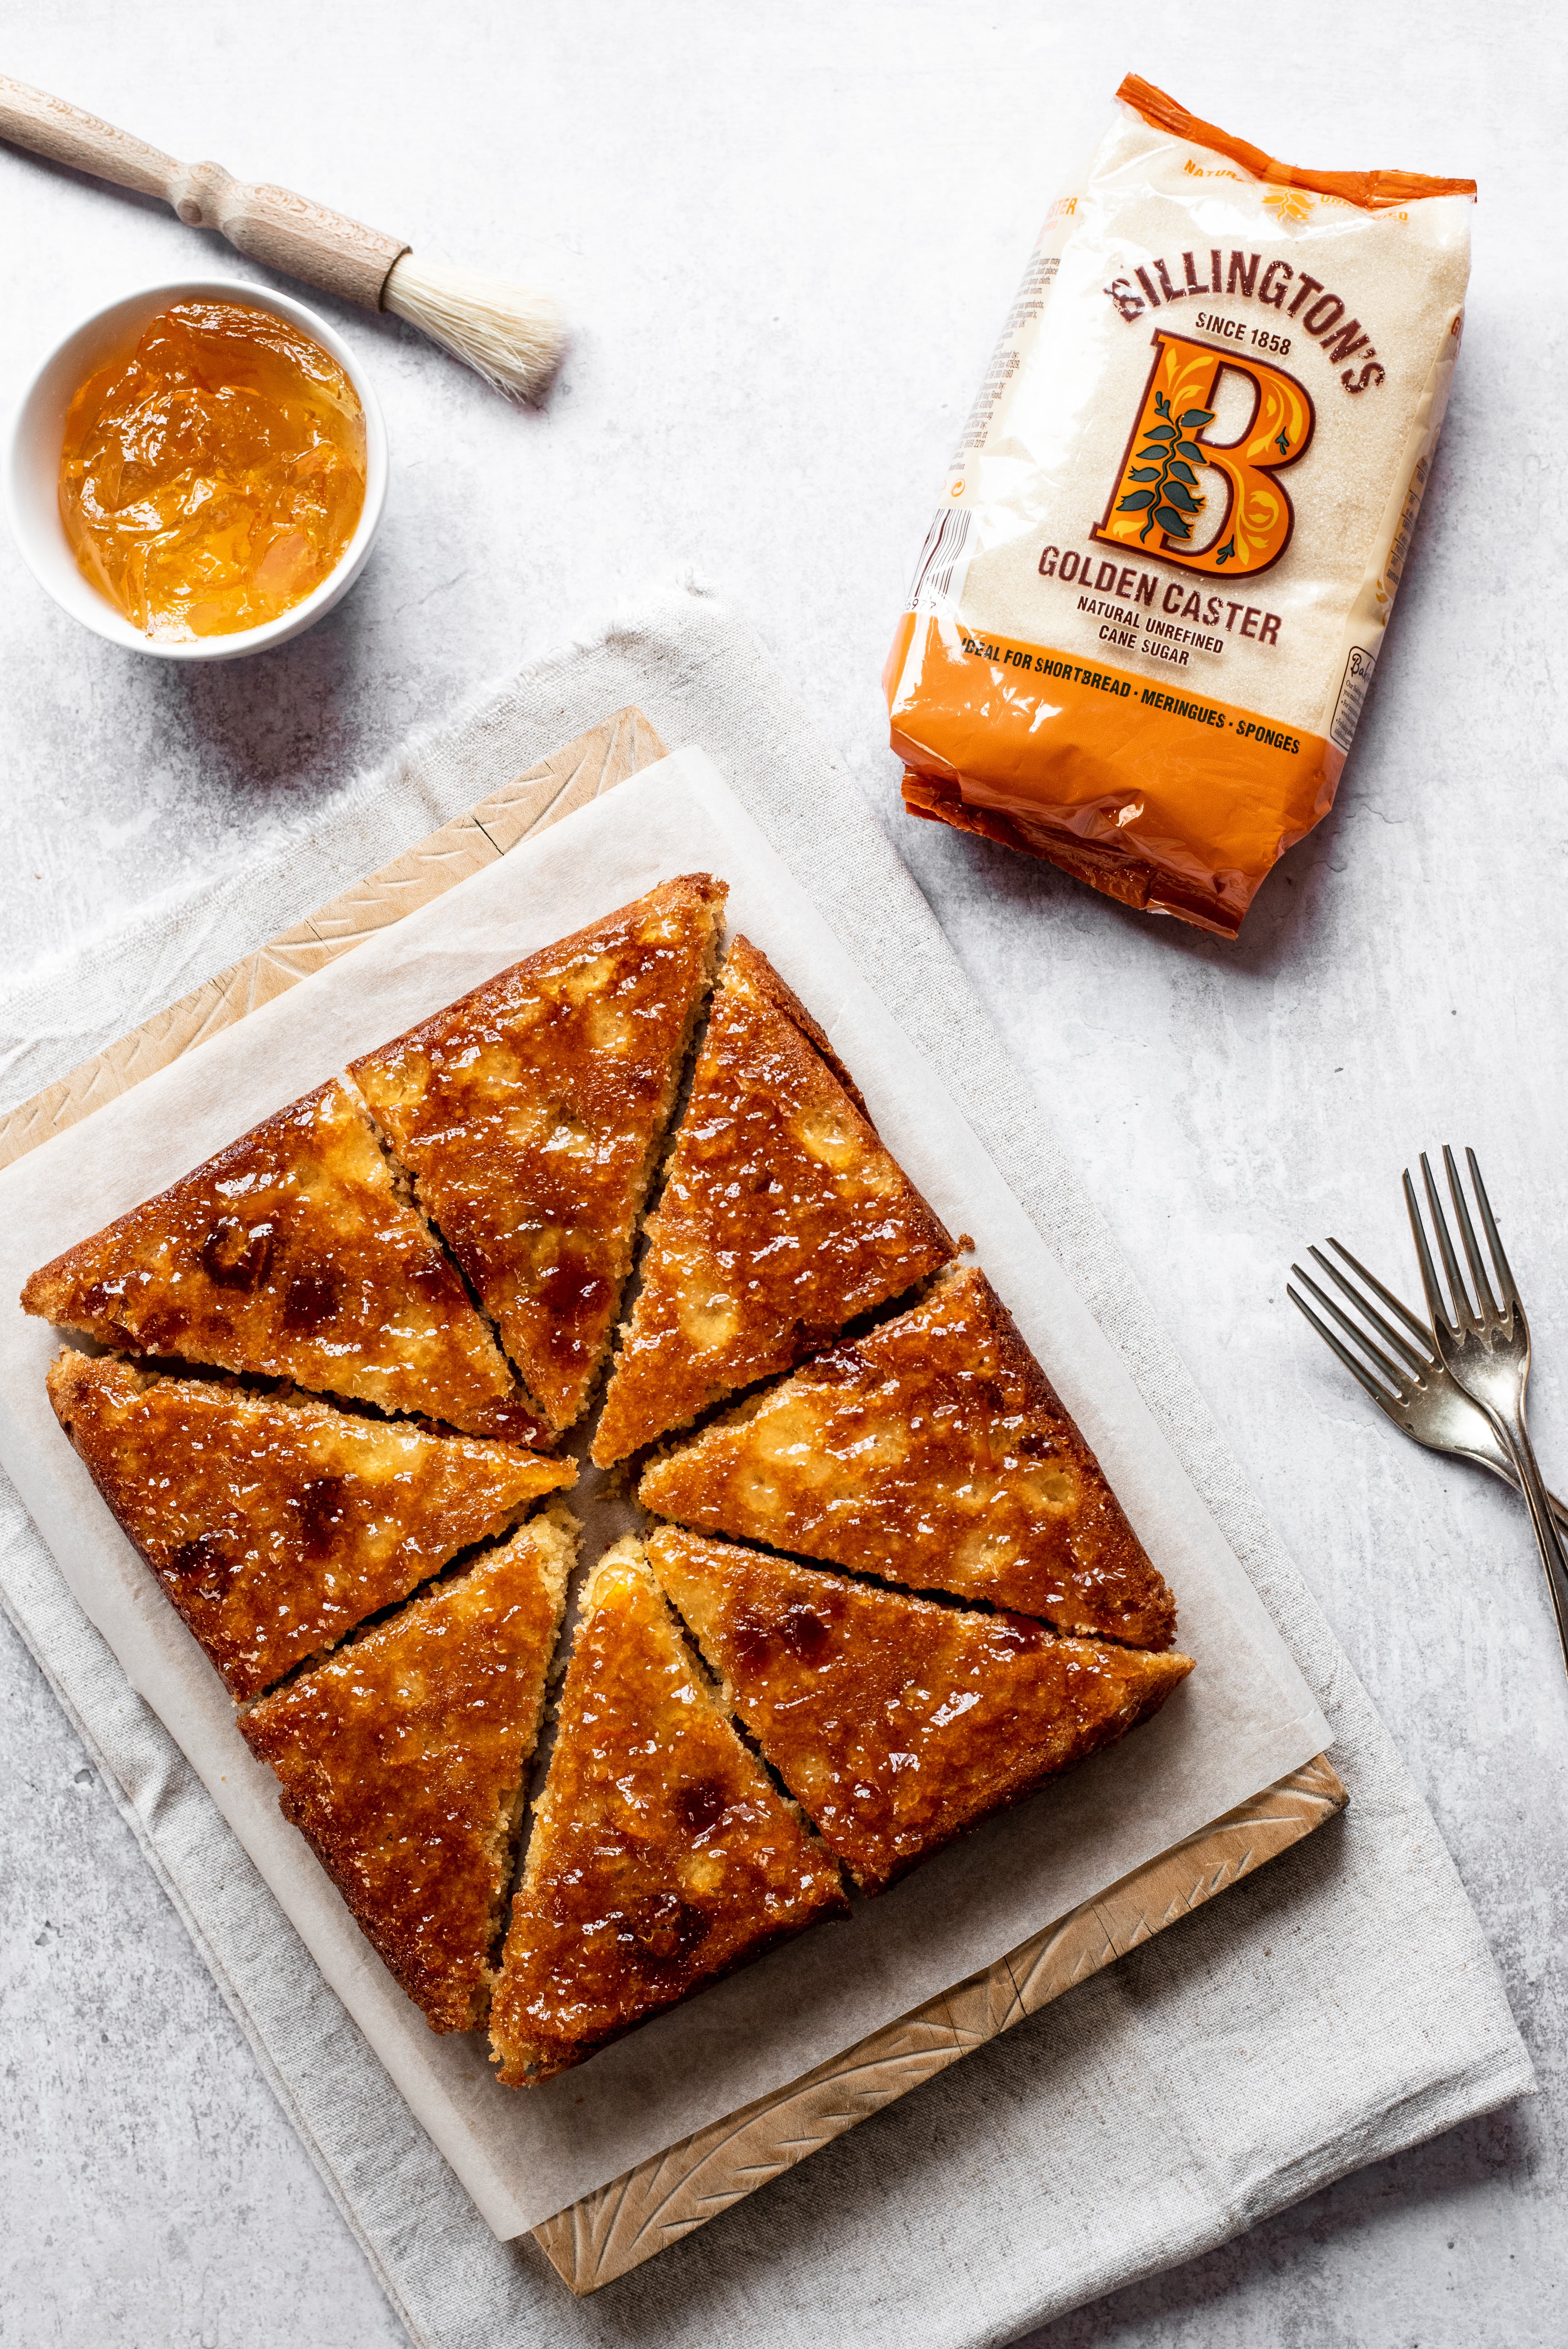 Marmalade Traybake lay on a sheet of baking paper, next to a bag of Billington's Golden Caster sugar and forks